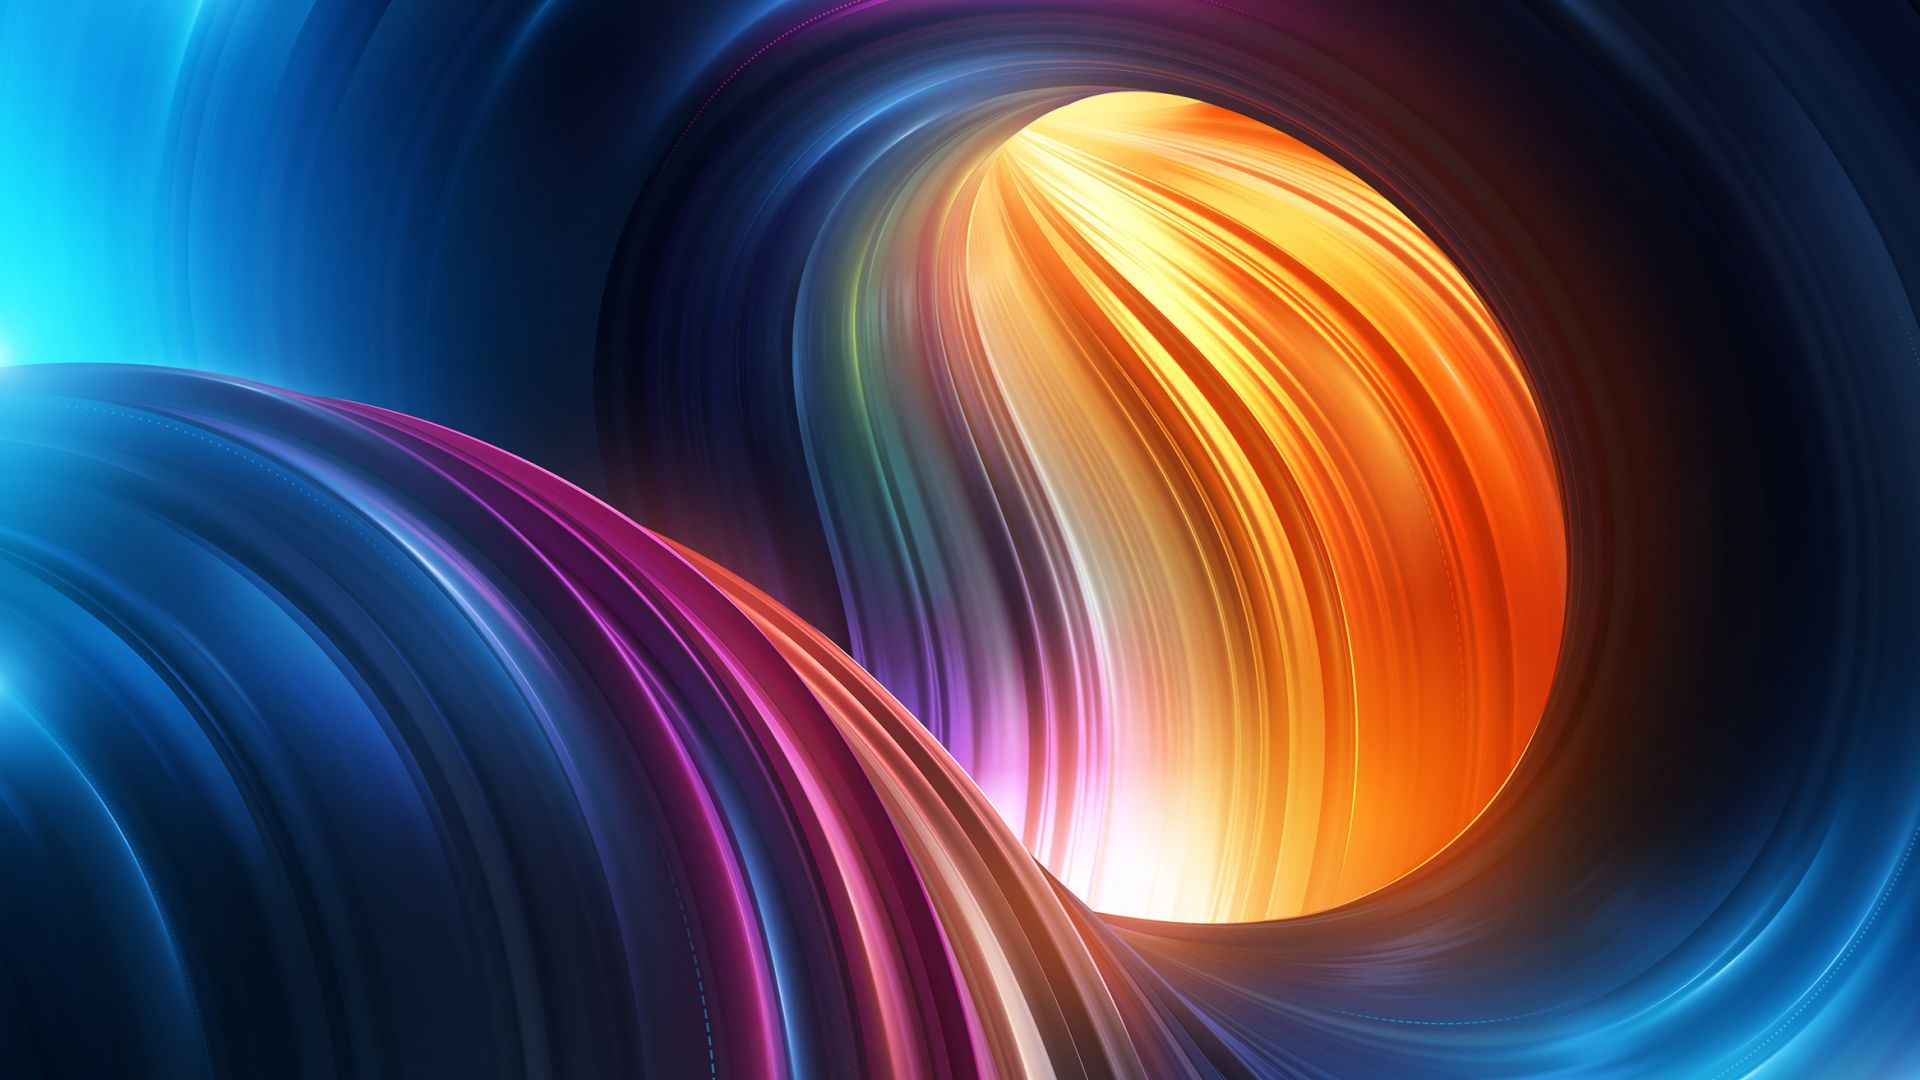 Wallpaper Colorful, curves, abstract, stock, digital art